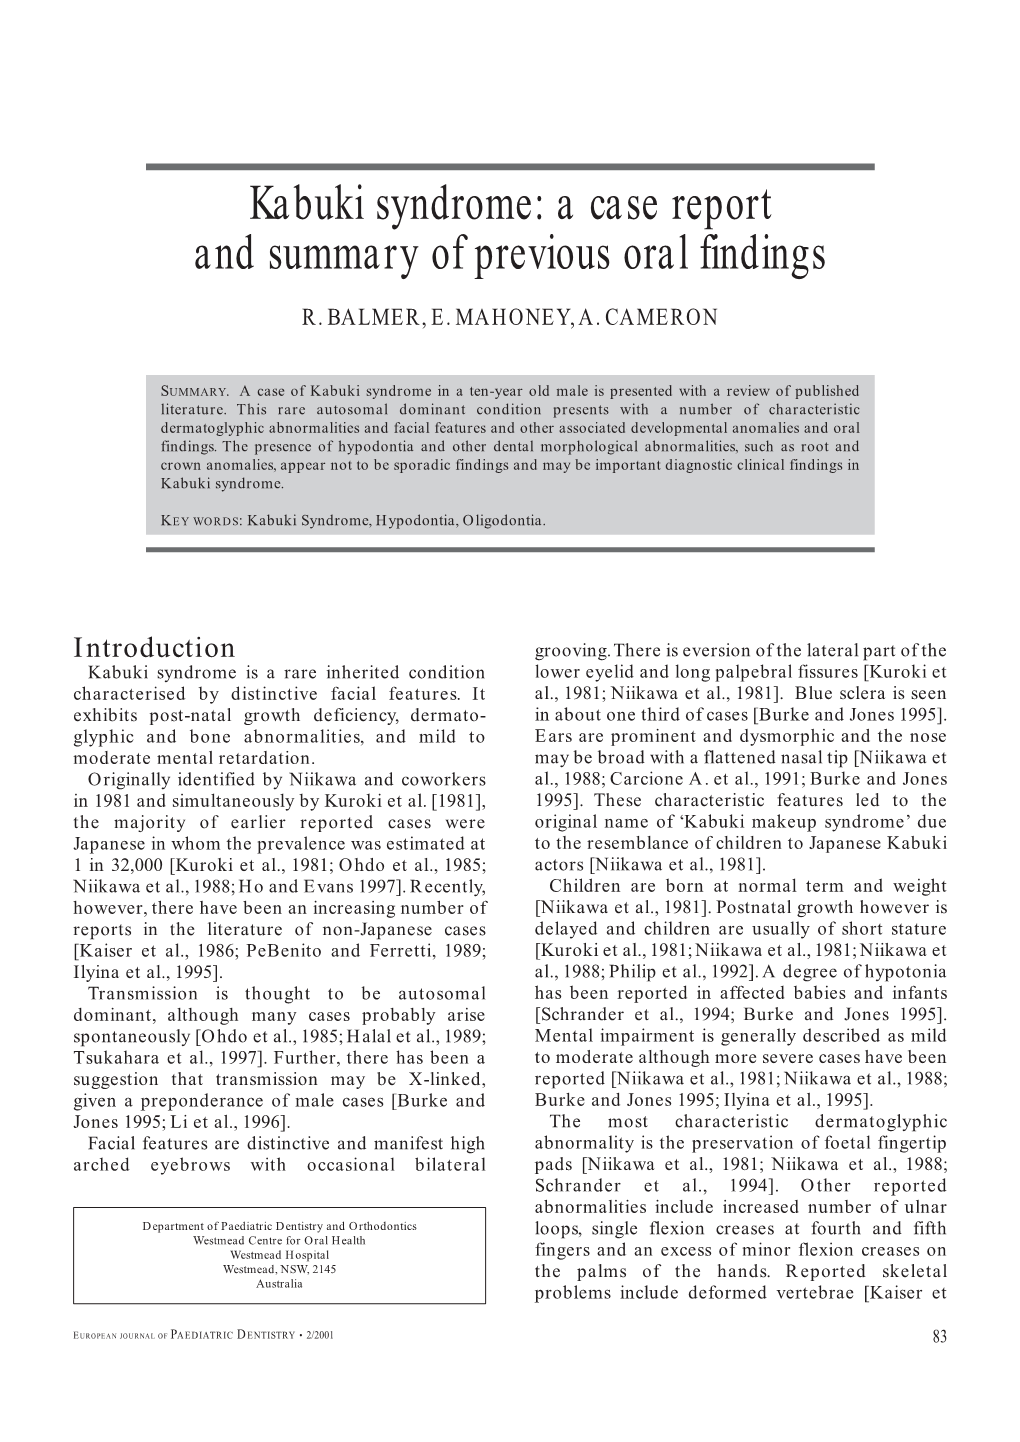 Kabuki Syndrome: a Case Report and Summary of Previous Oral Findings